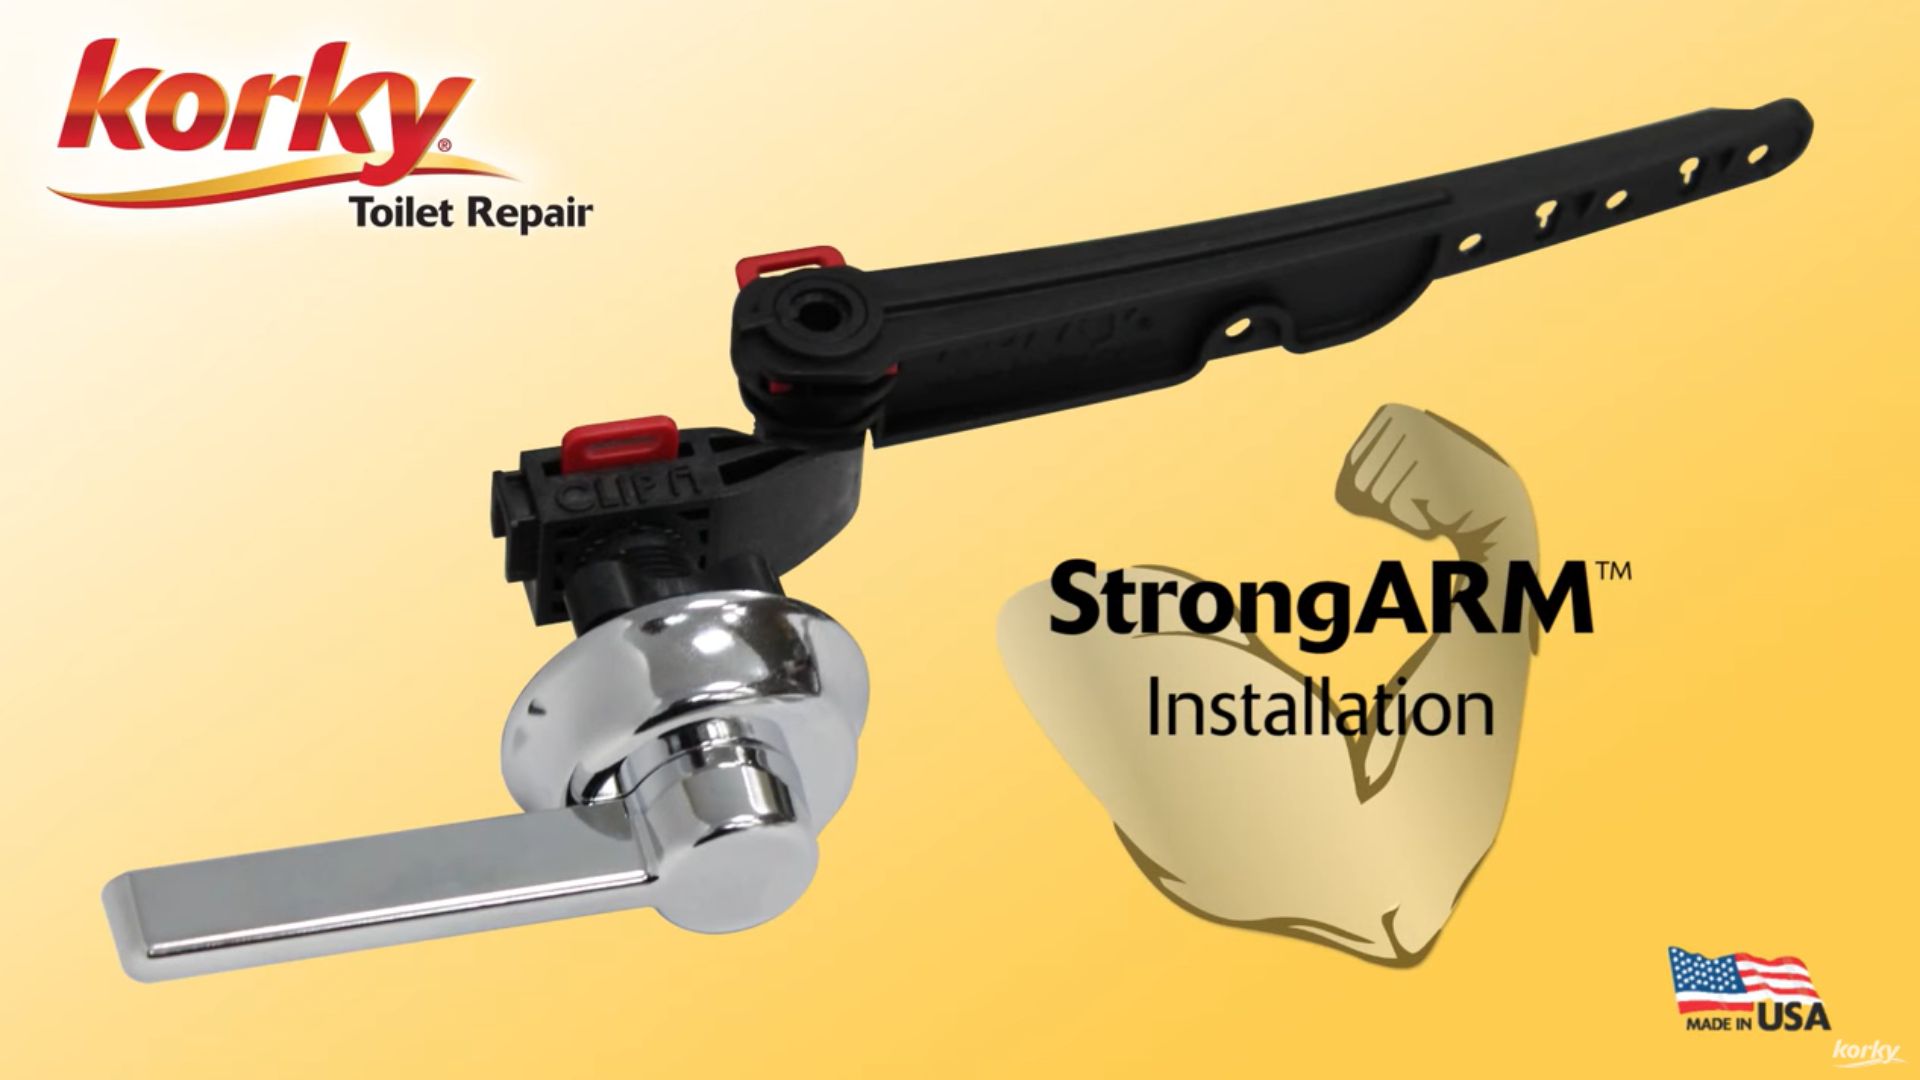 How to Install StrongARM Toilet Tank Lever by Korky